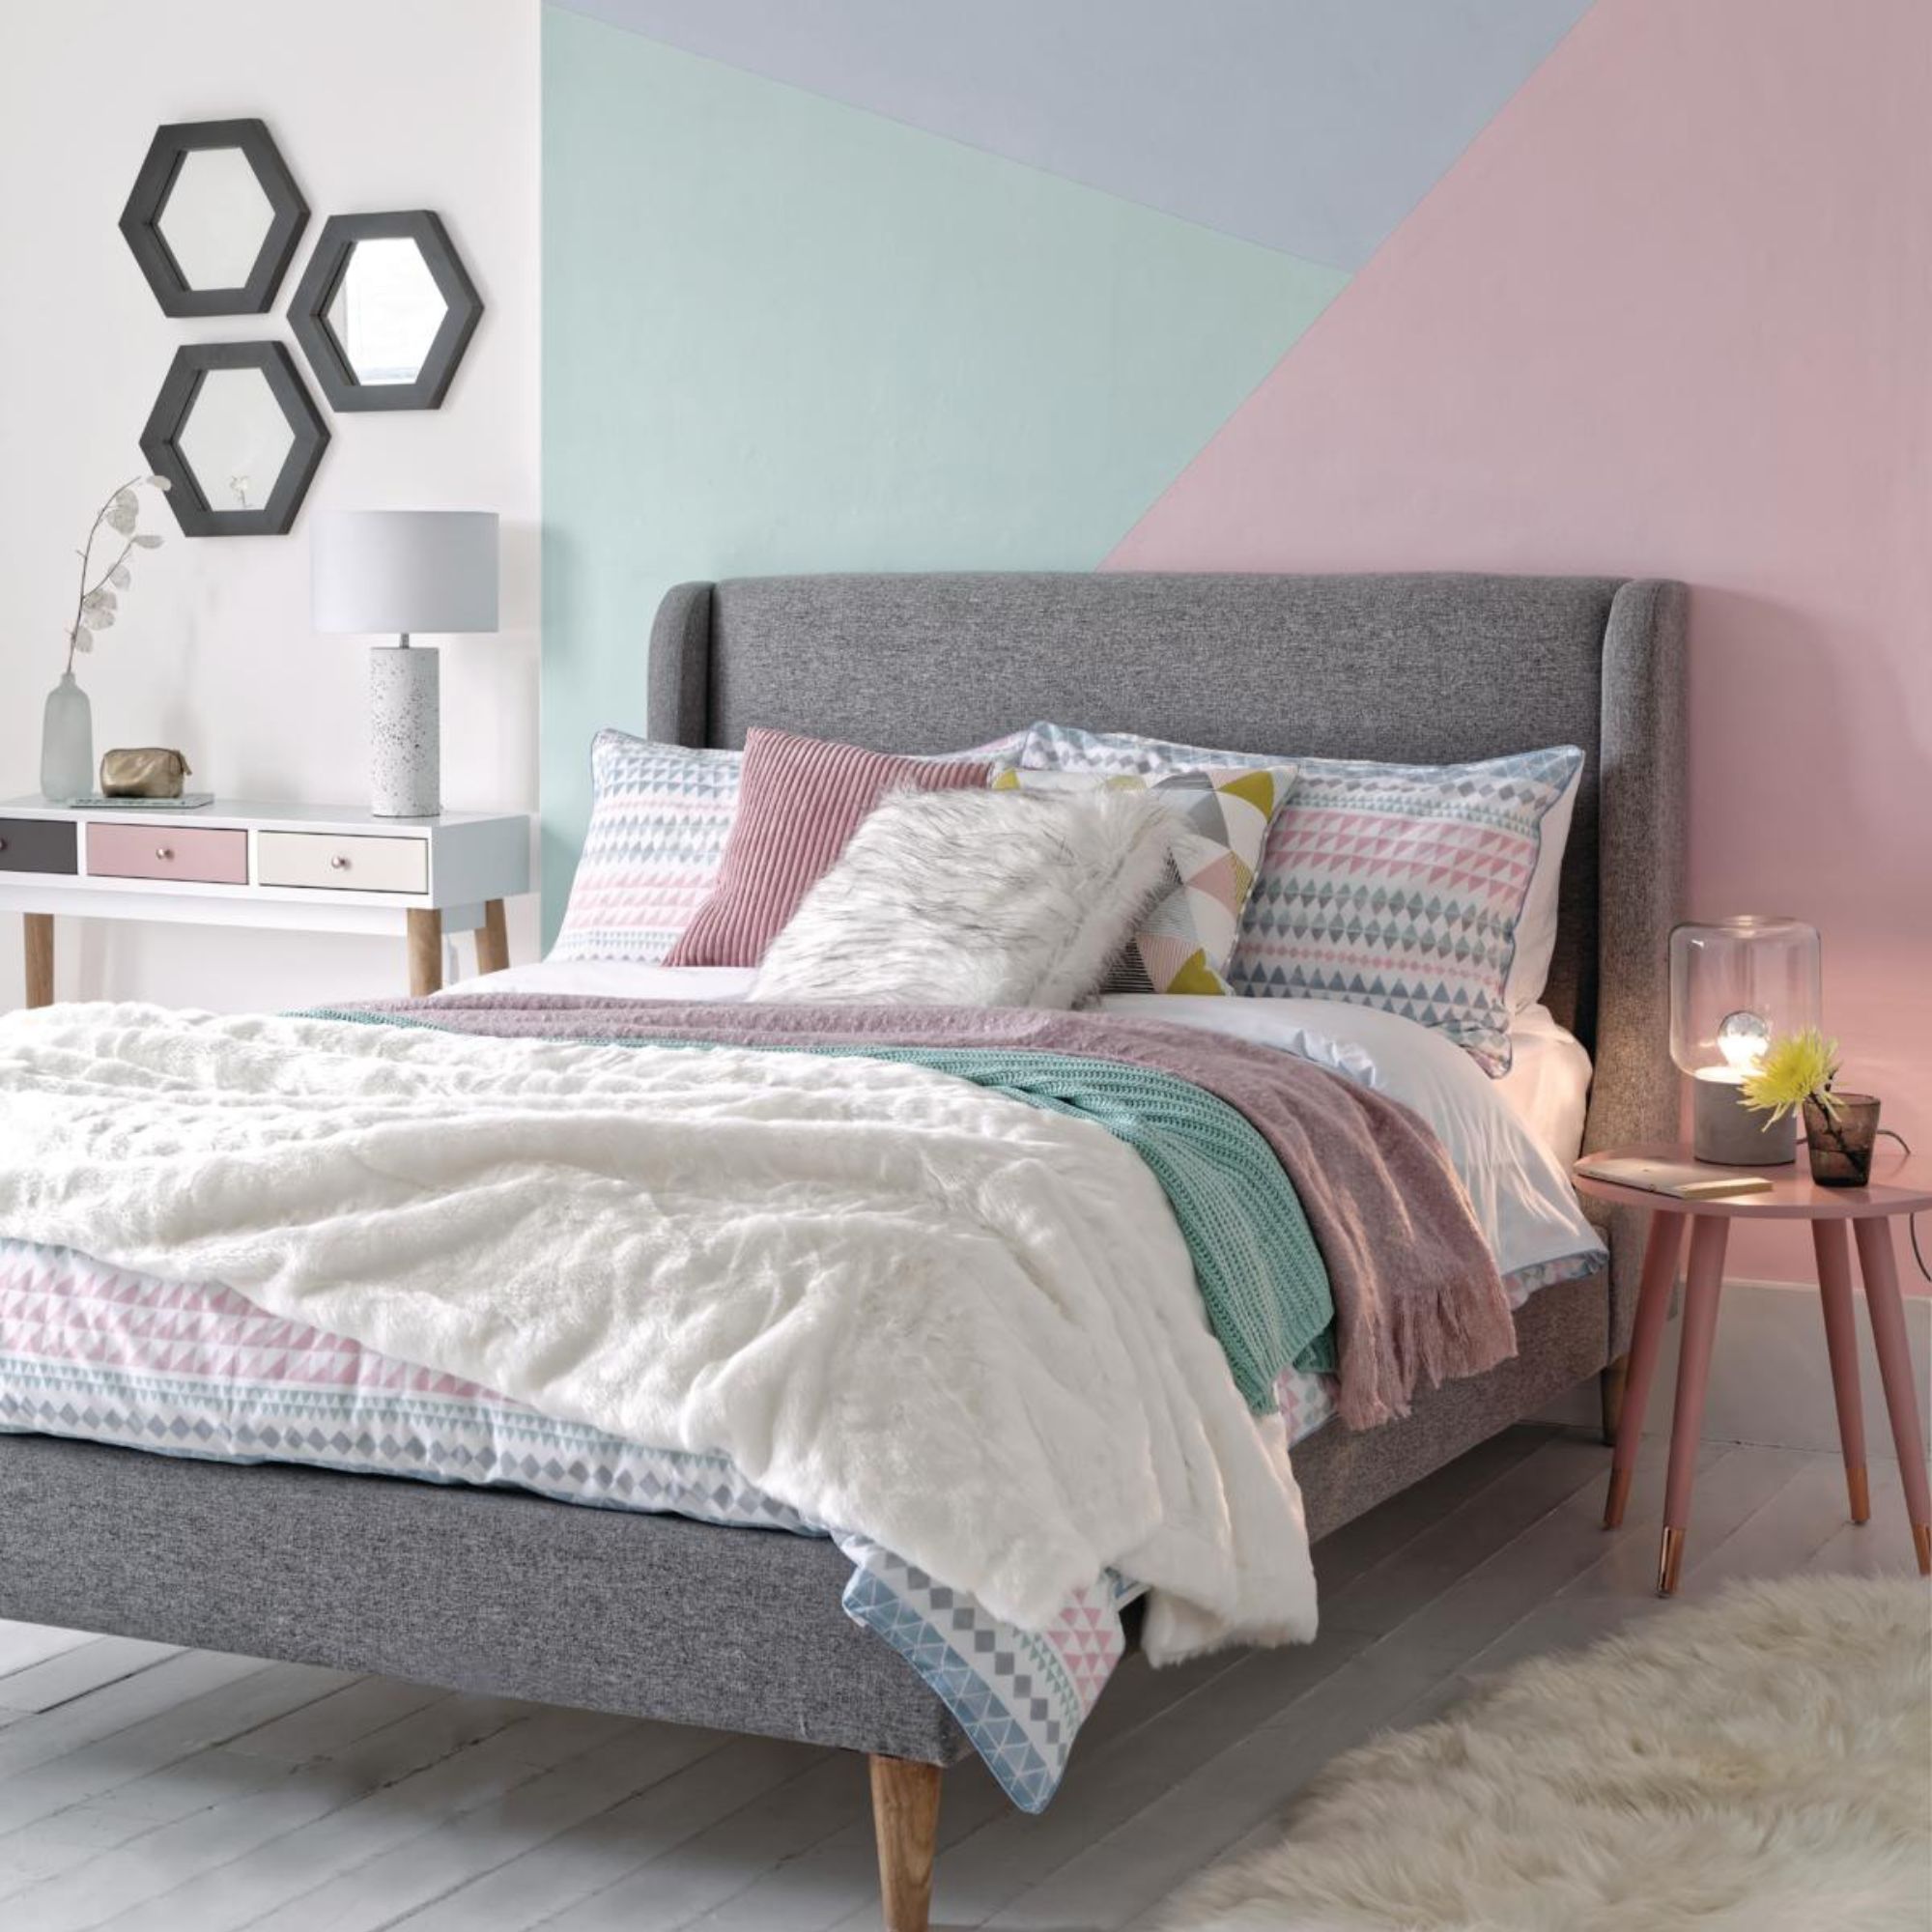 Double bed with multicoloured cushions and throws on a white wooden floor with a geometric design on the wall behind.